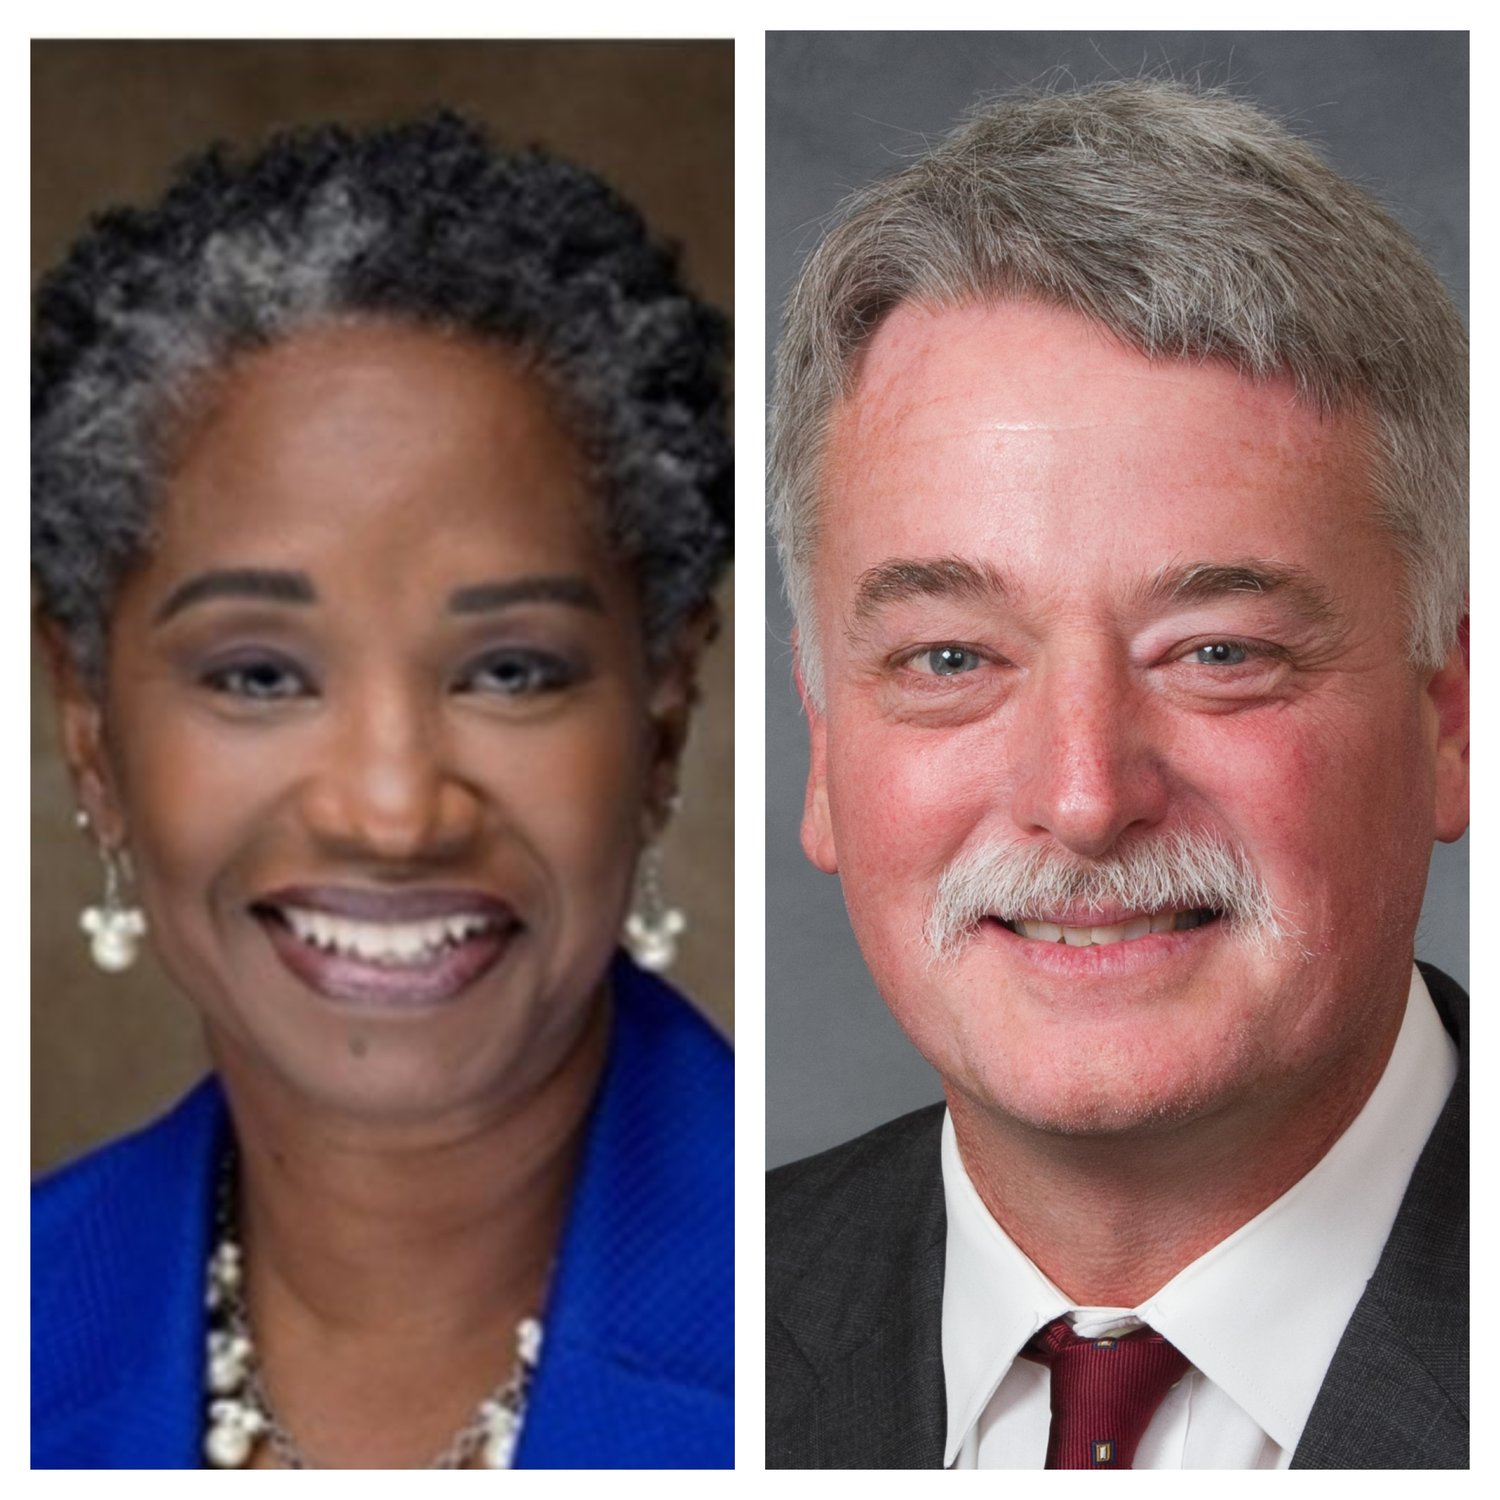 Democrat Val Applewhite and Republican Wesley Meredith are competing for the N.C. Senate District 19 seat.